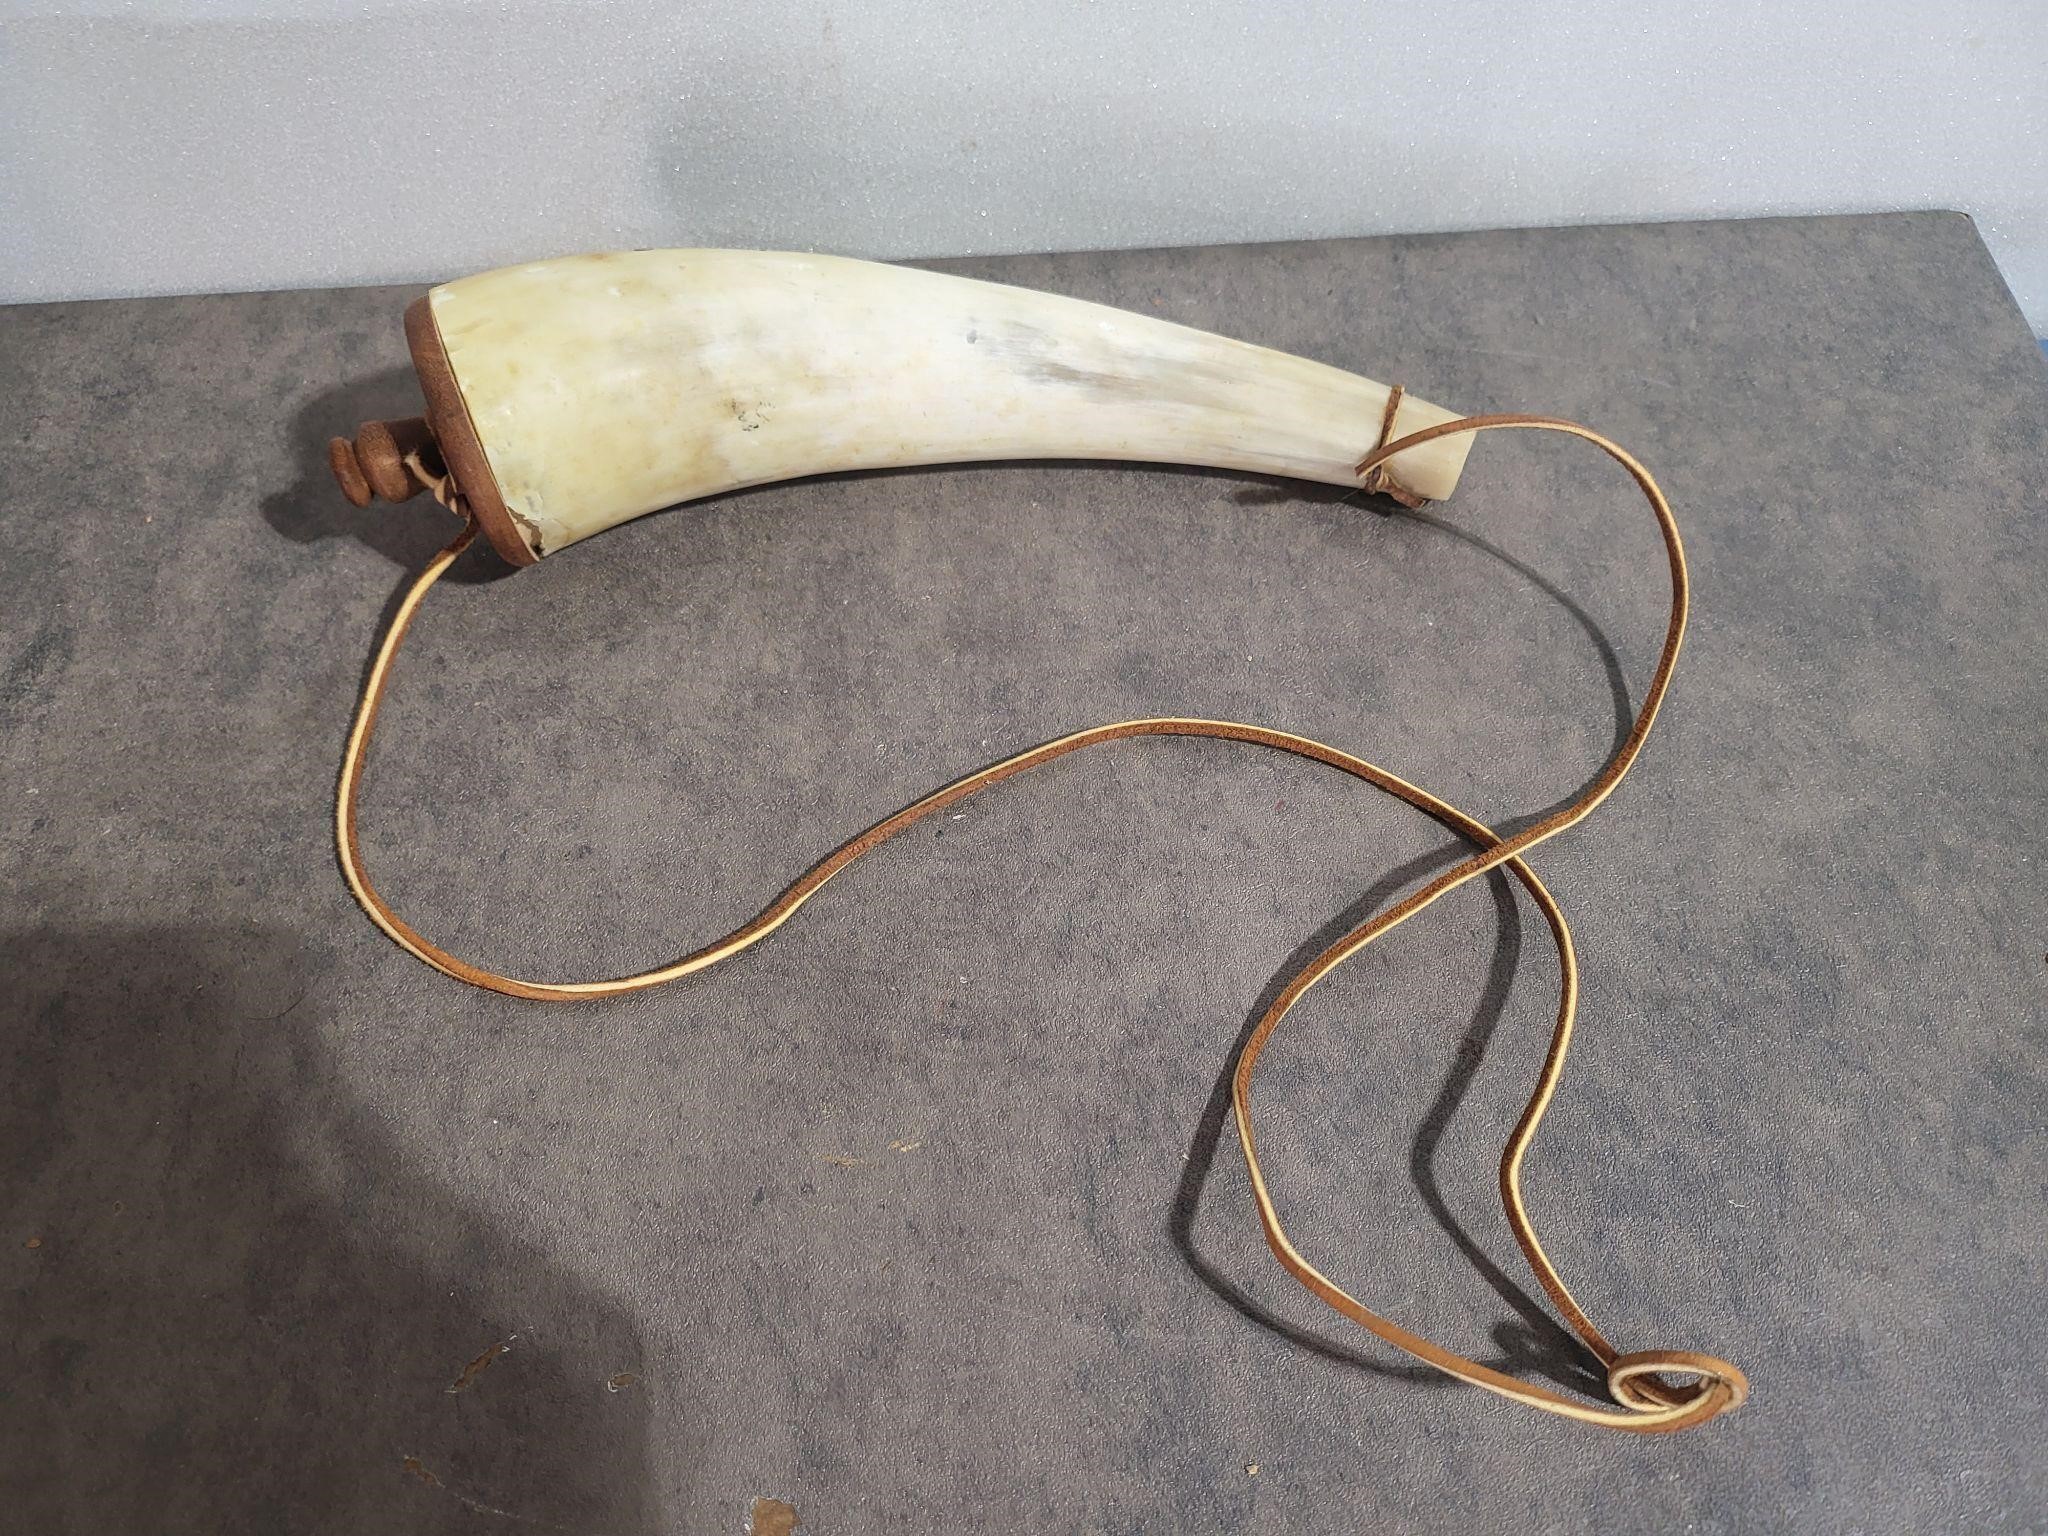 Old blow horn